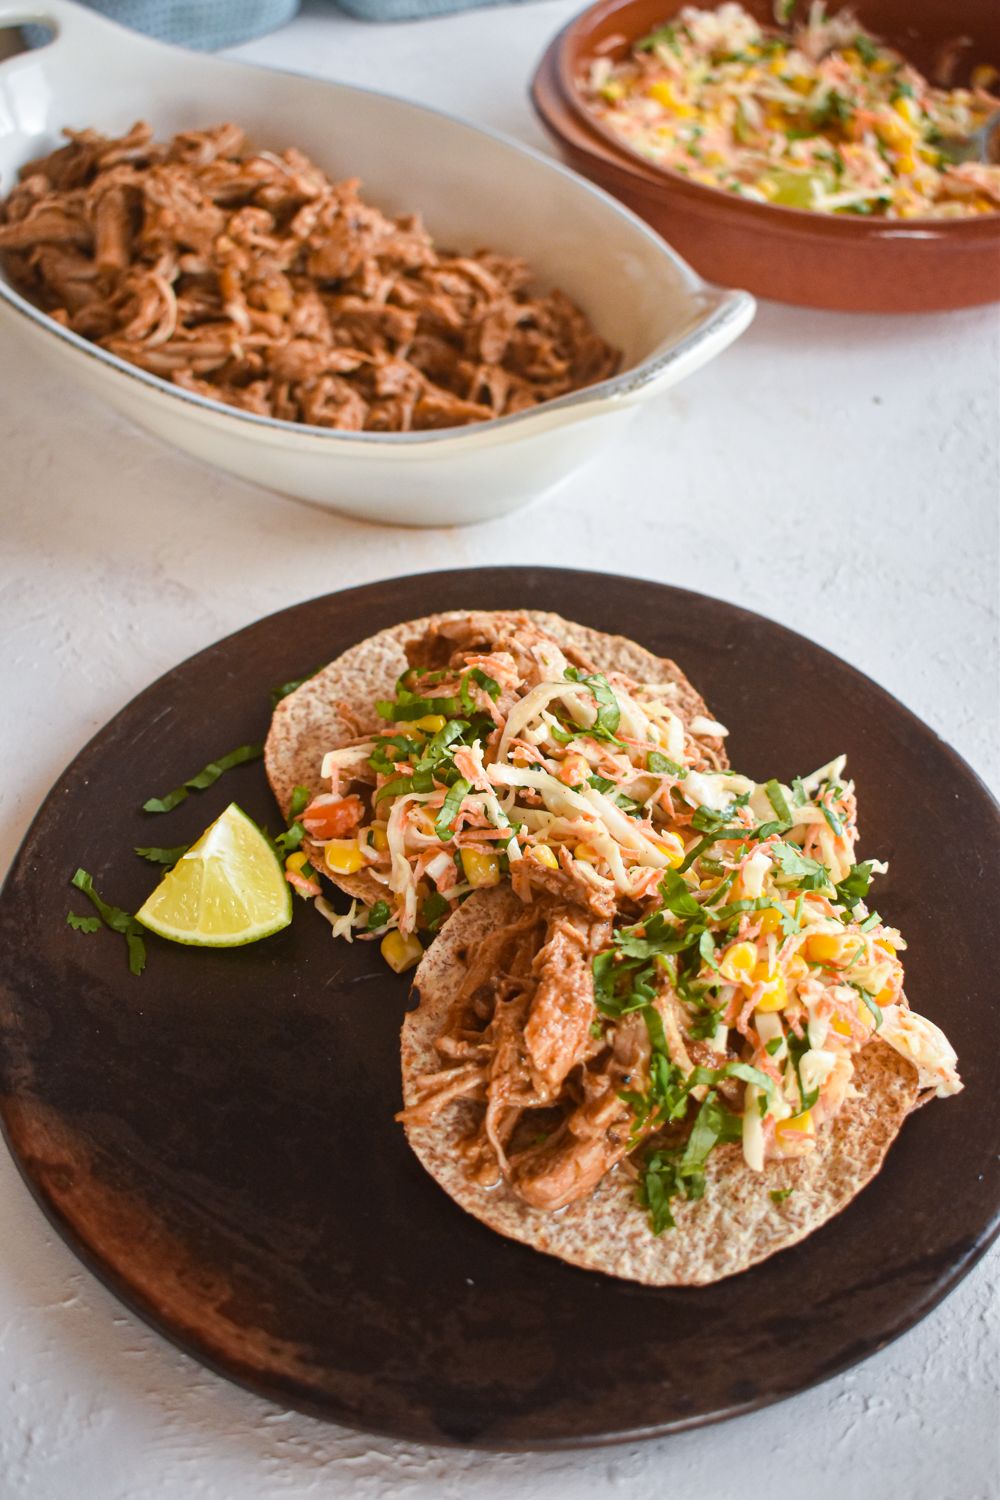 Chorizo spiced pulled pork on a toasted corn tortilla with corn slaw.